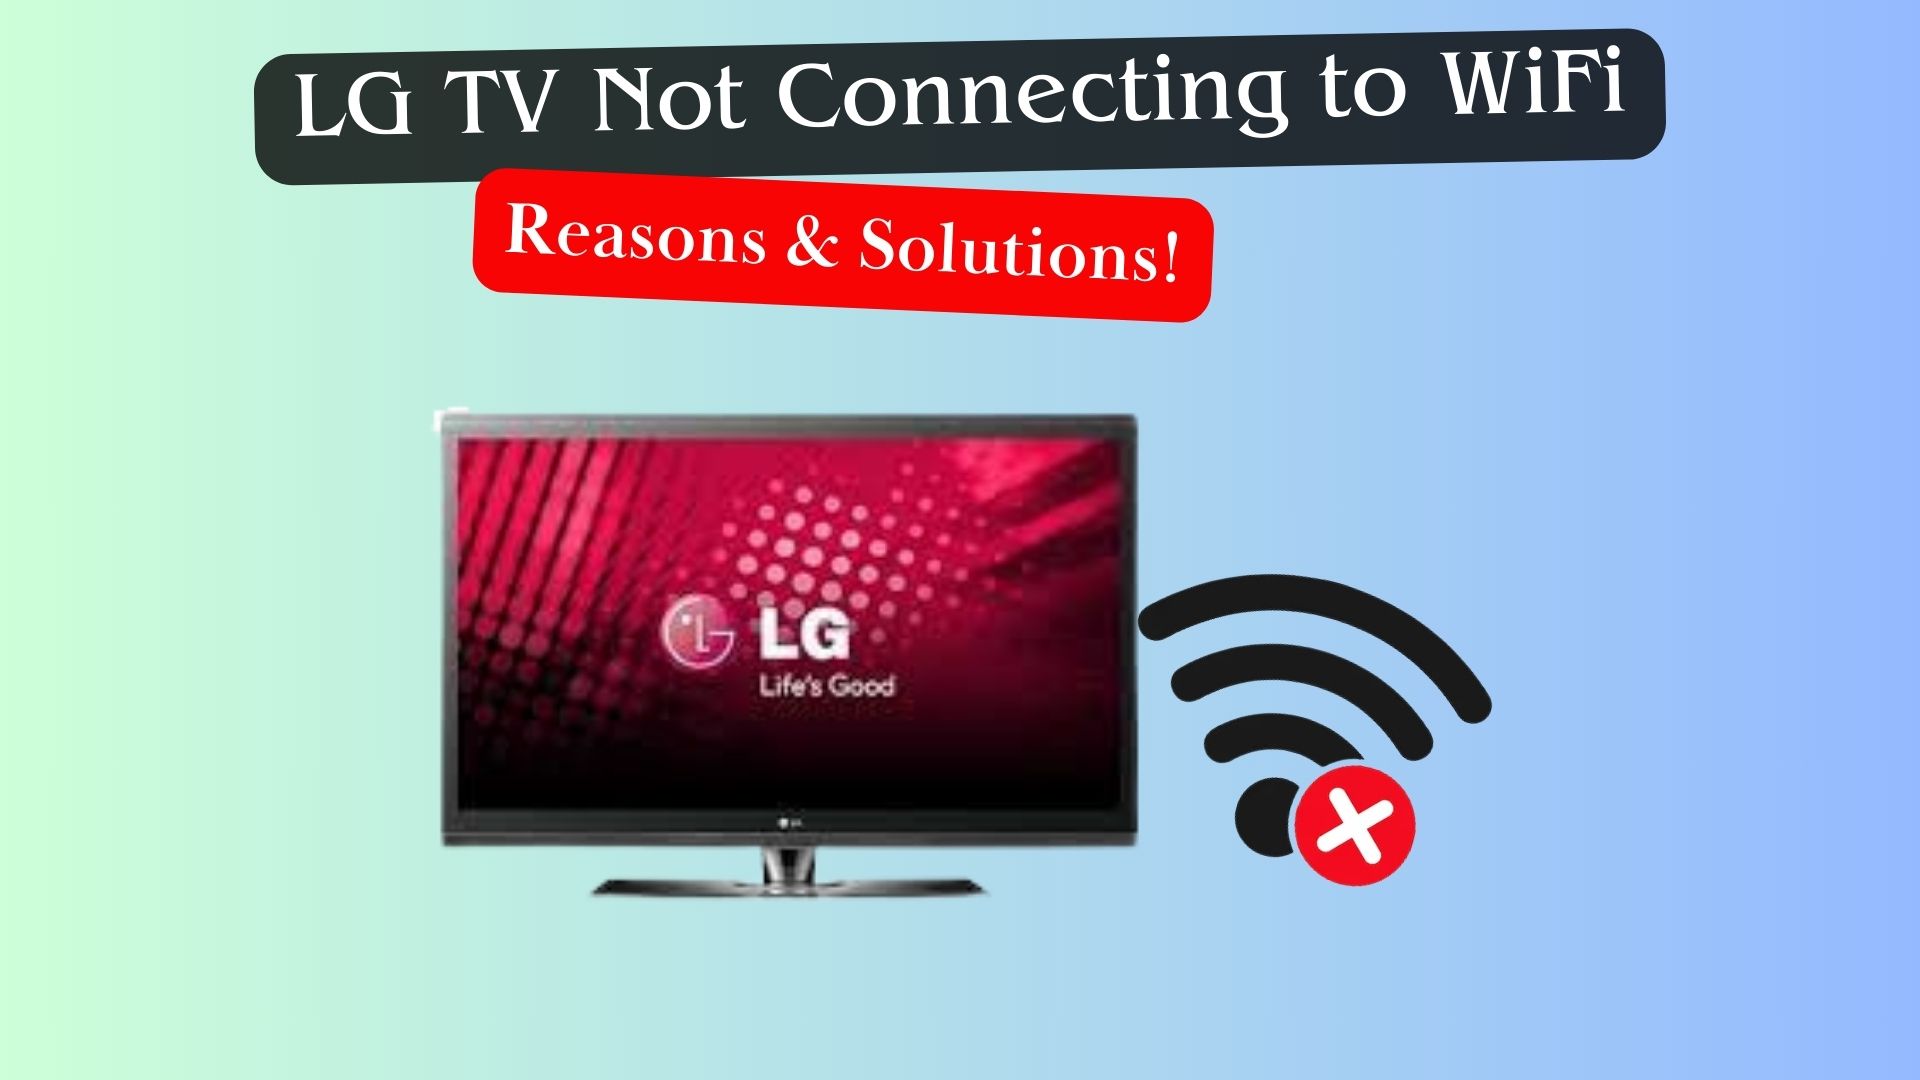 LG TV Not Connecting to WiFi: Reasons & Solutions